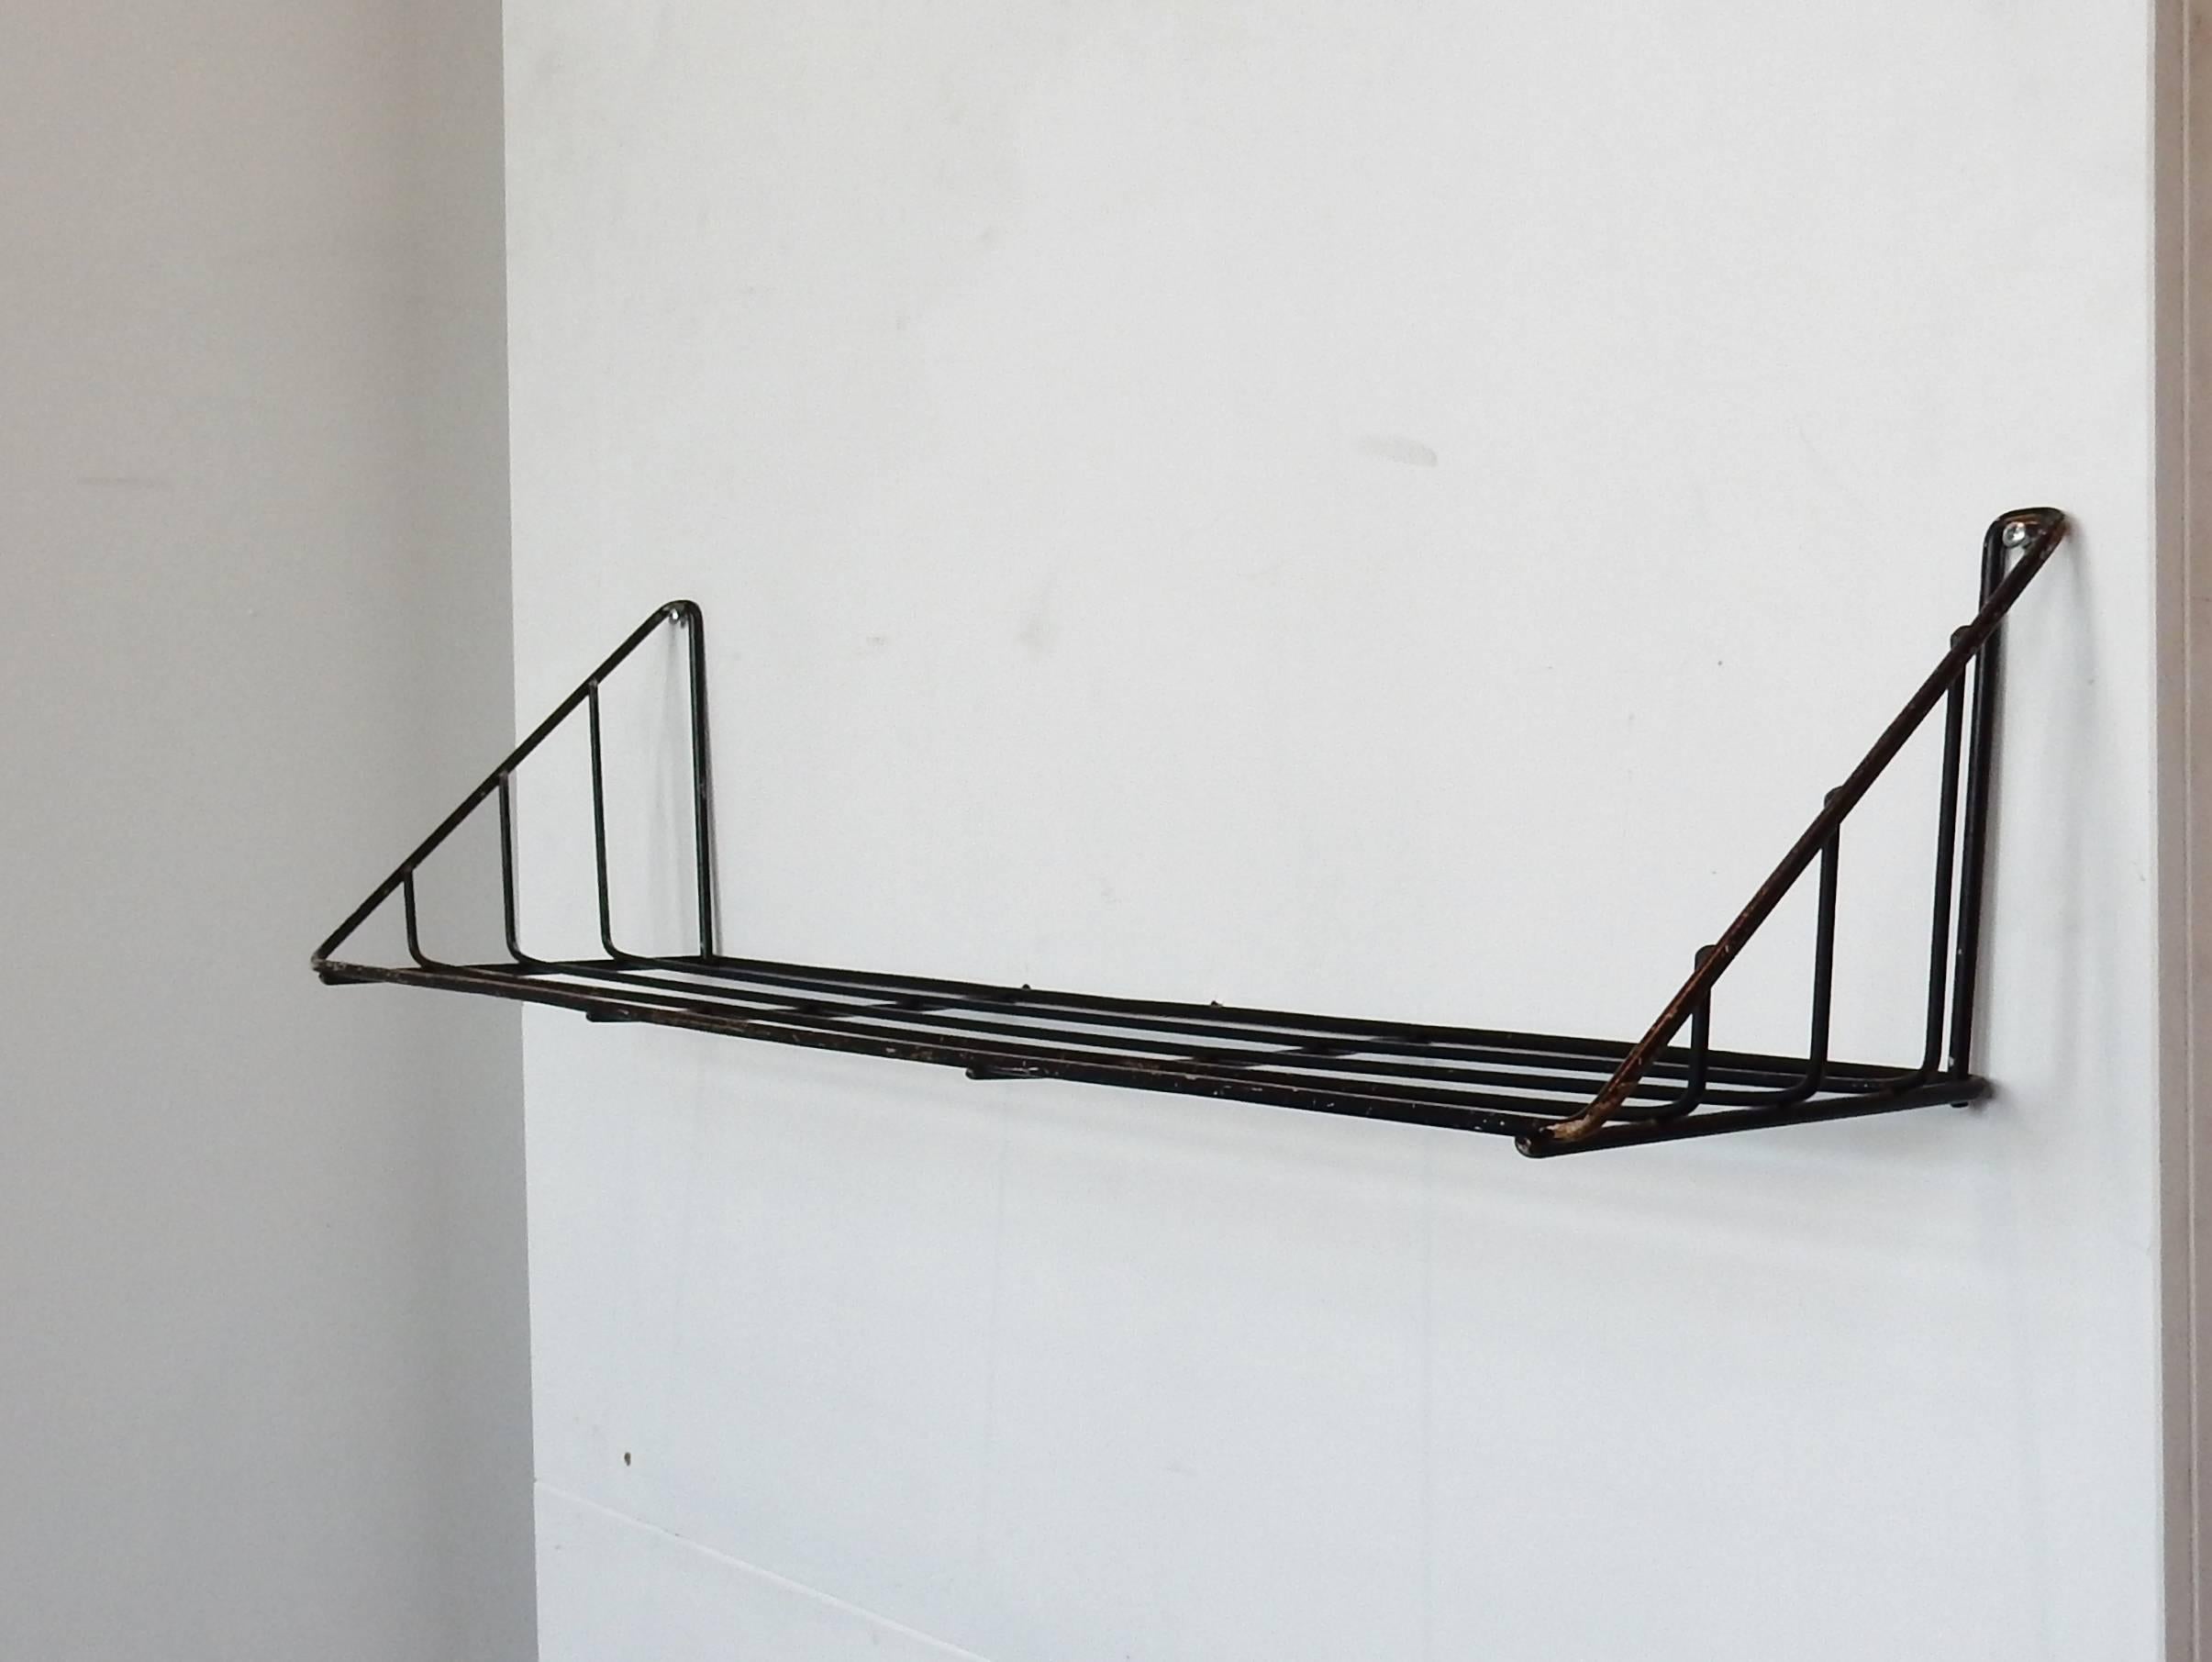 Lacquered Highly Rare Set of Two 'Delft' Wall Shelves by Cobra Artist Constant Nieuwenhuys